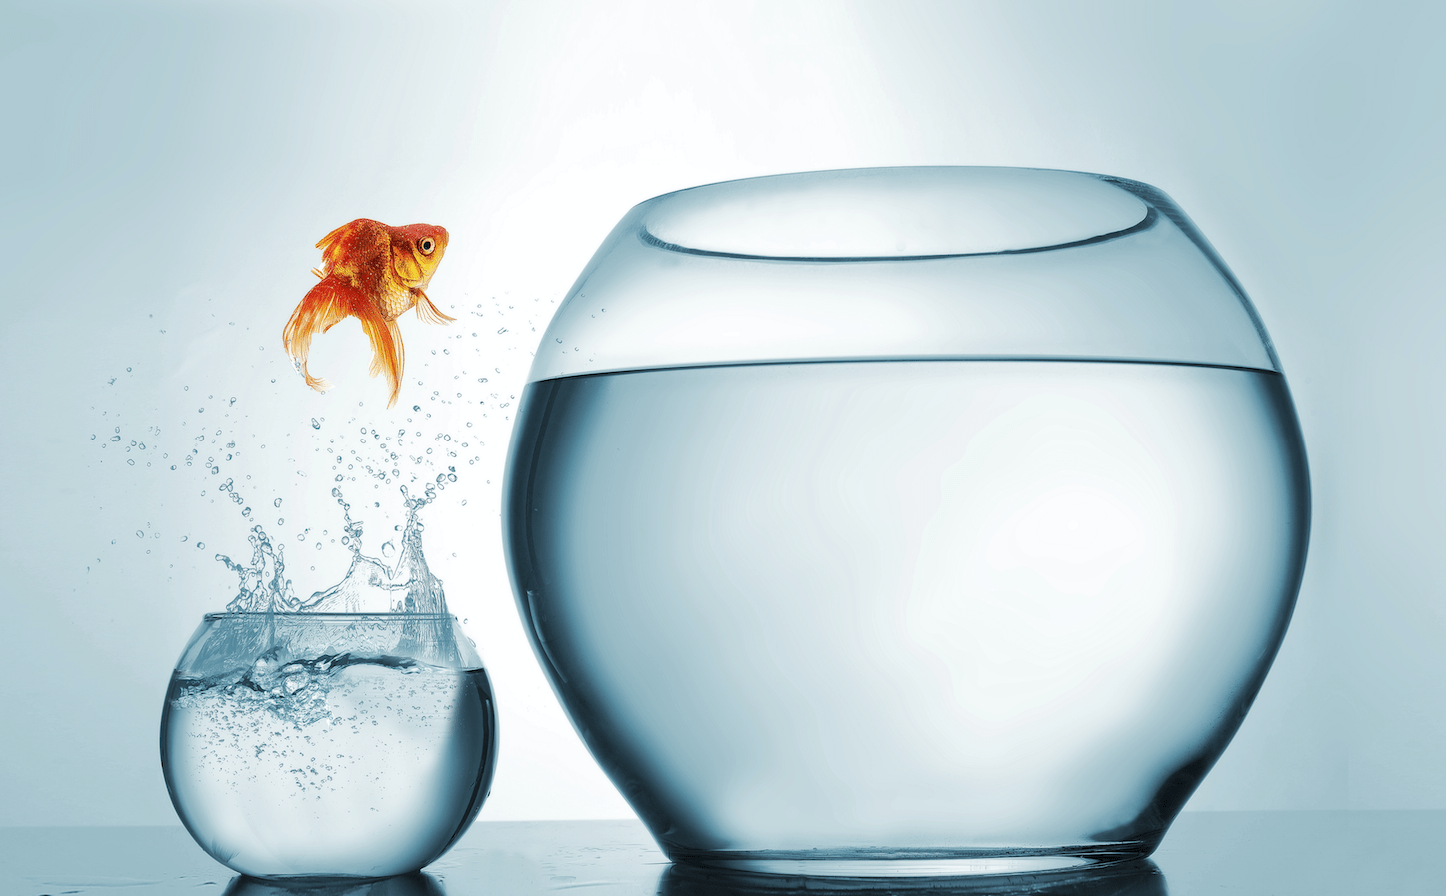 A goldfish jumps from a small bowl to a larger one